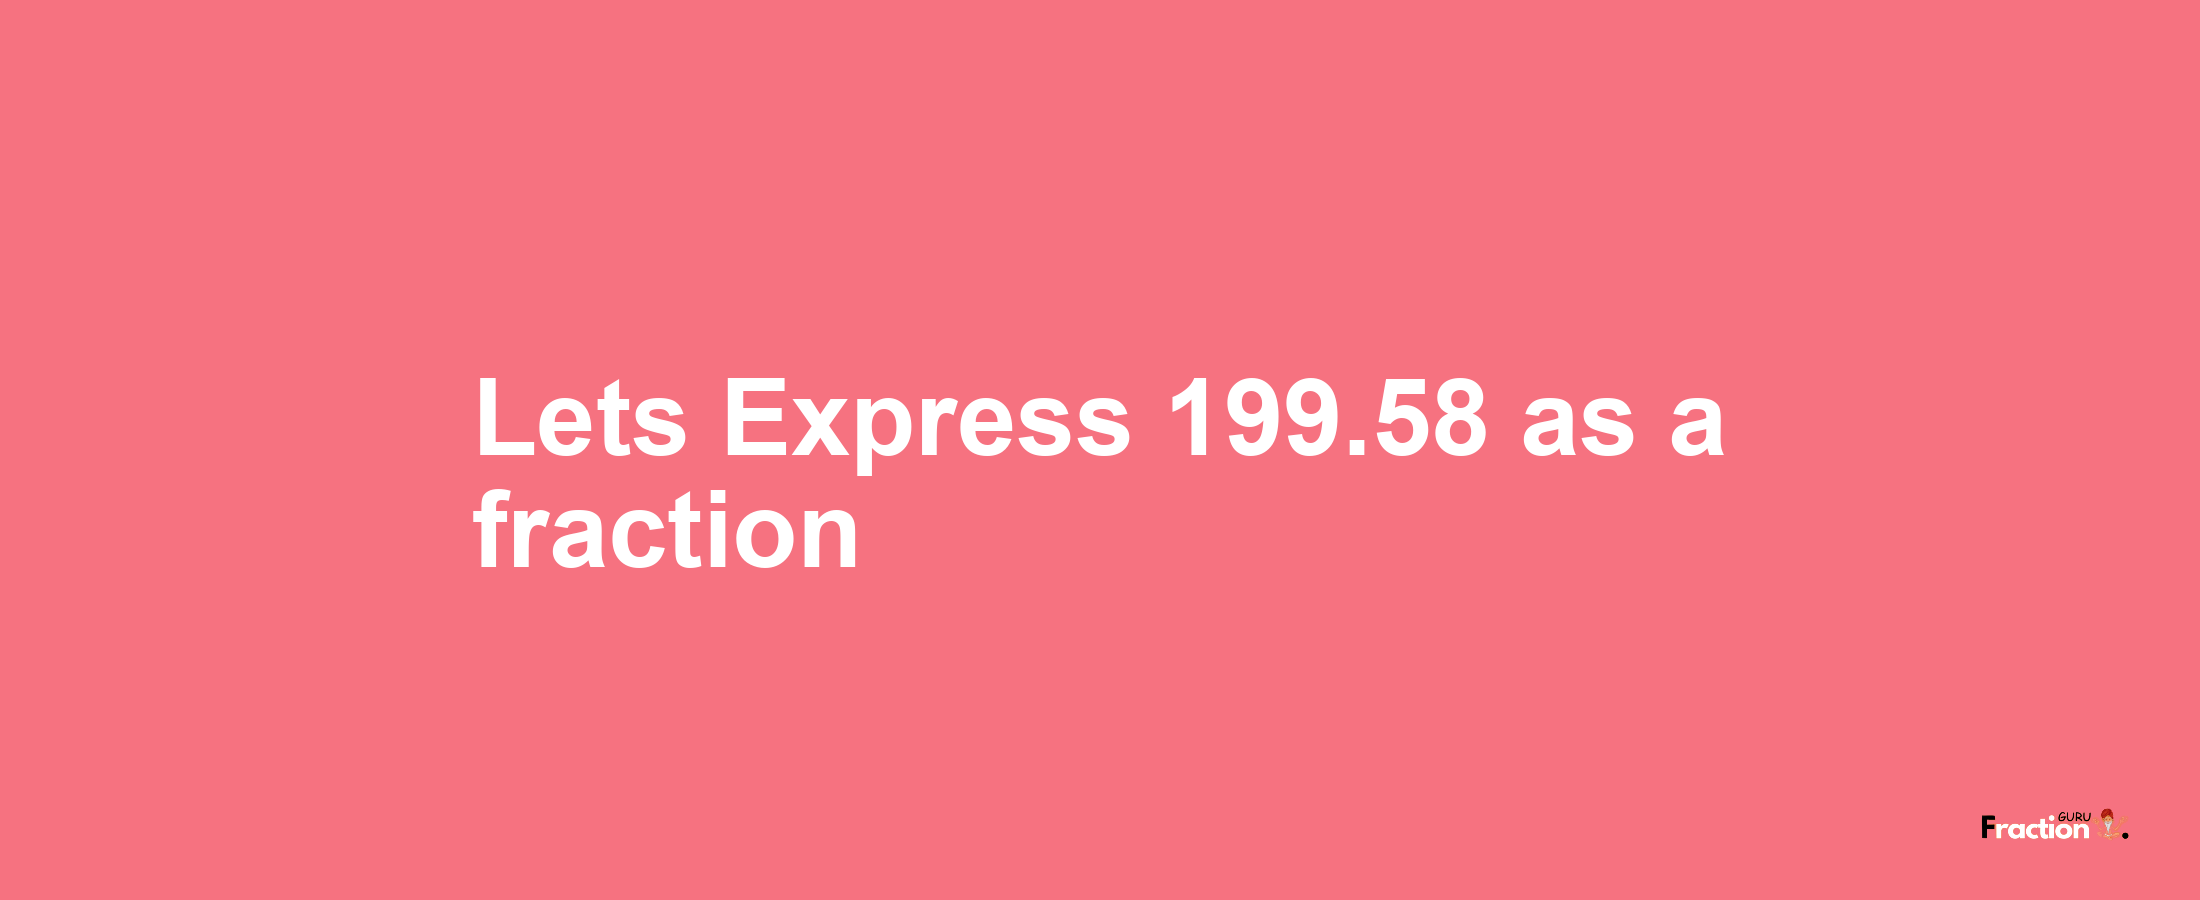 Lets Express 199.58 as afraction